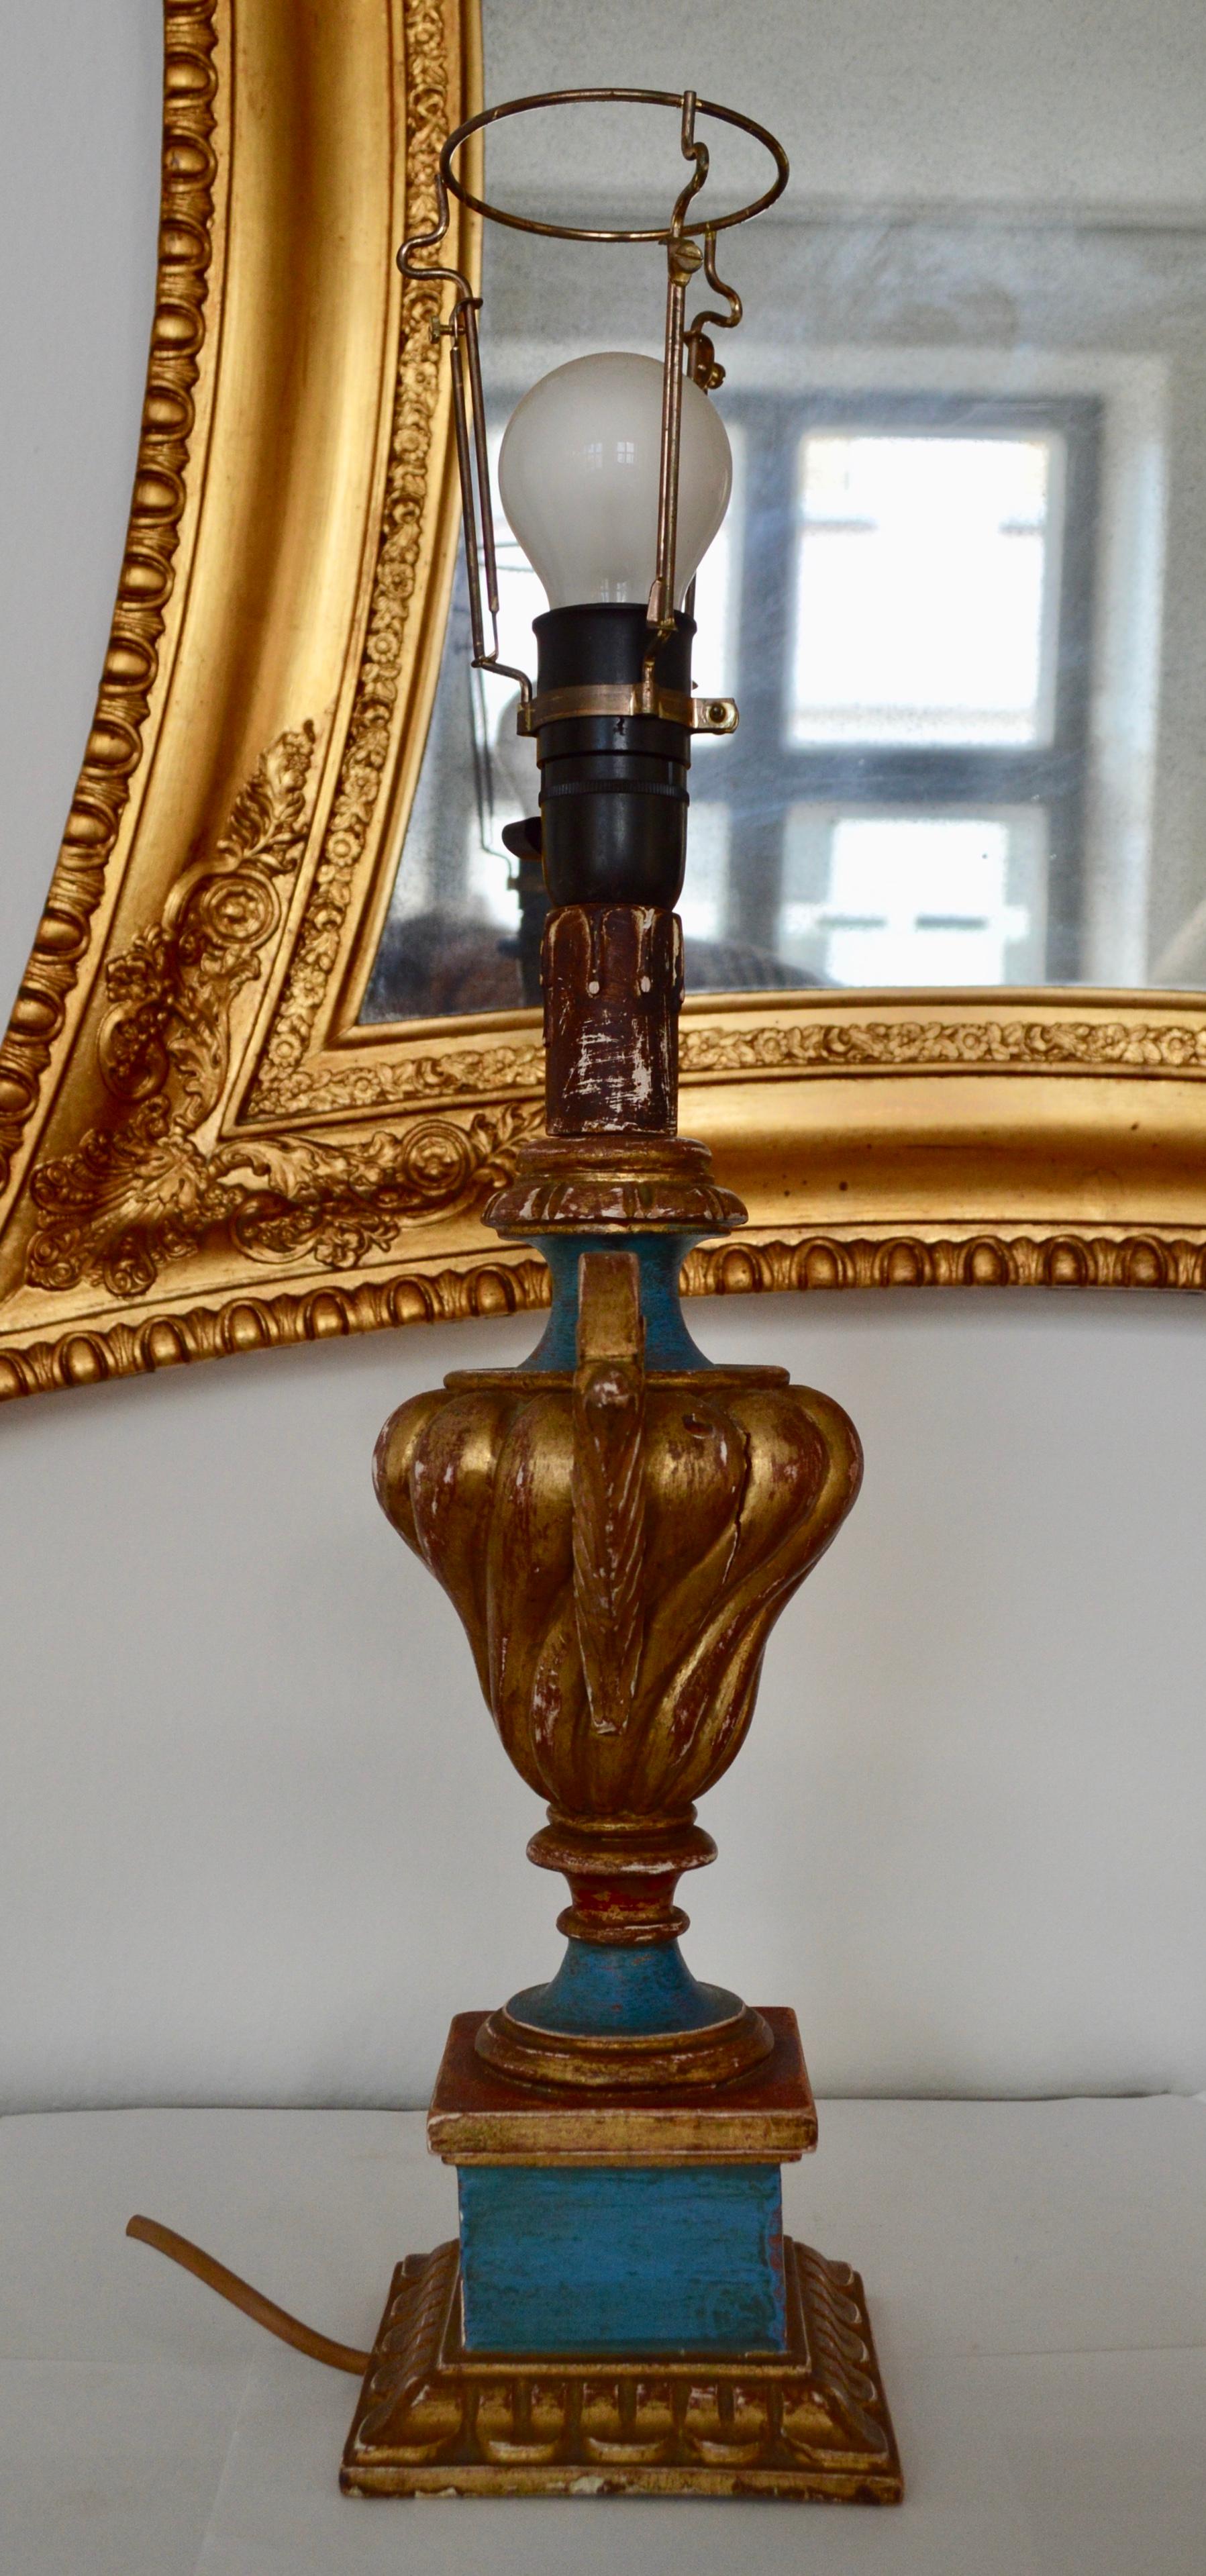 Gilded 19th Century Wooden Urn-Shaped Rococo Table Lamp For Sale 6